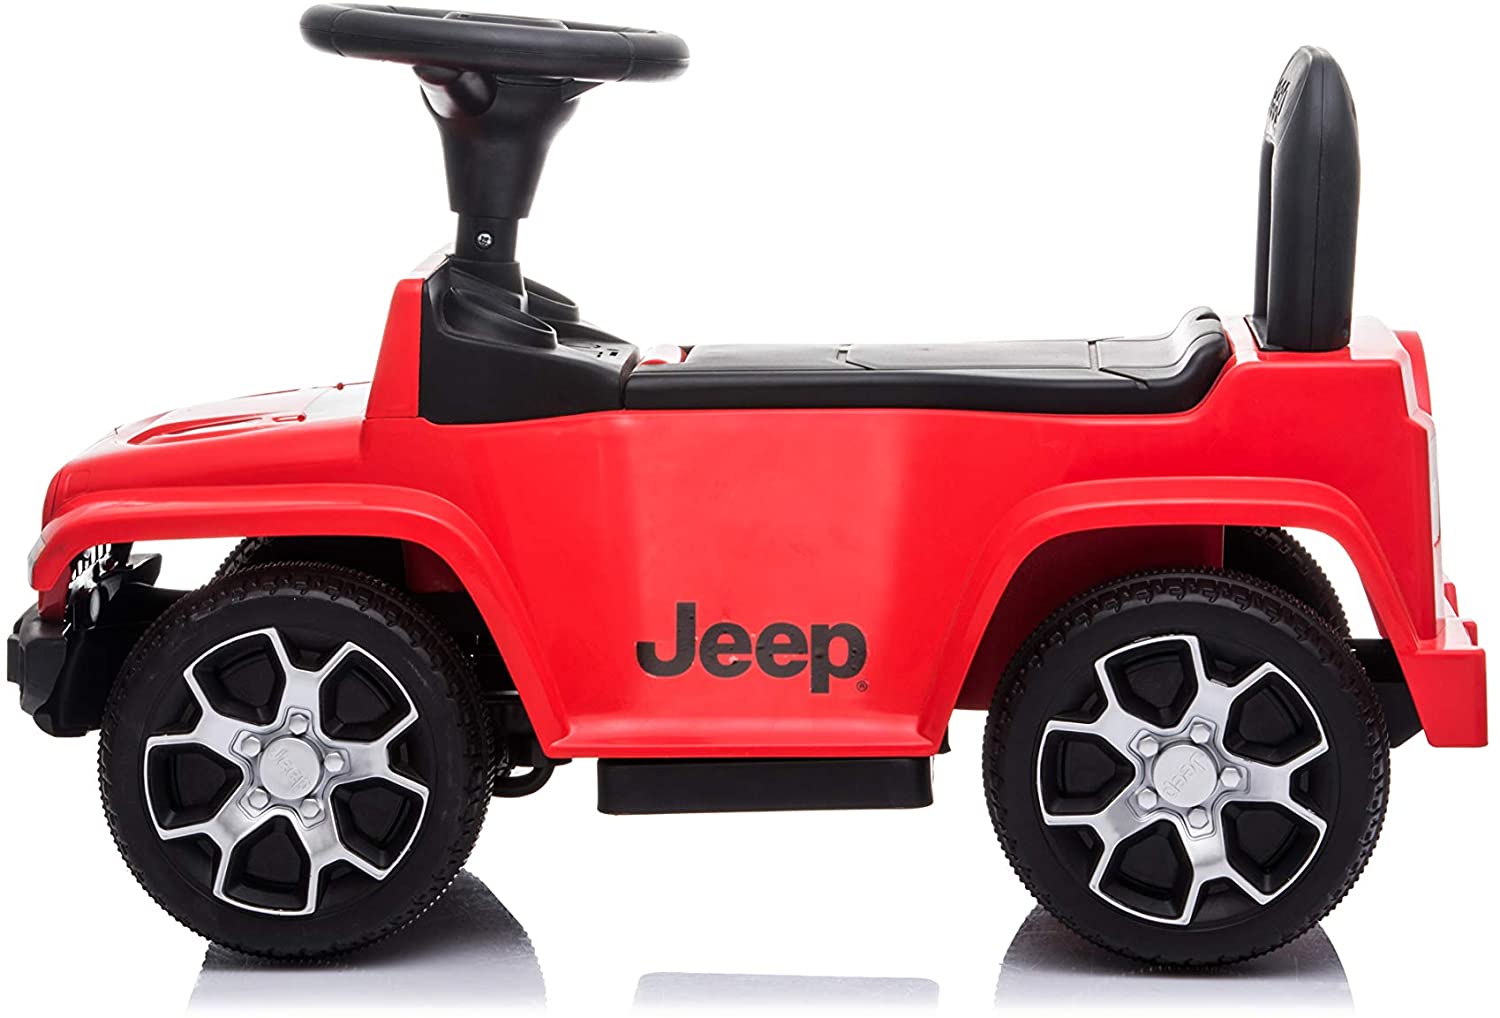 Best Ride On Cars Jeep Rubicon Push Car